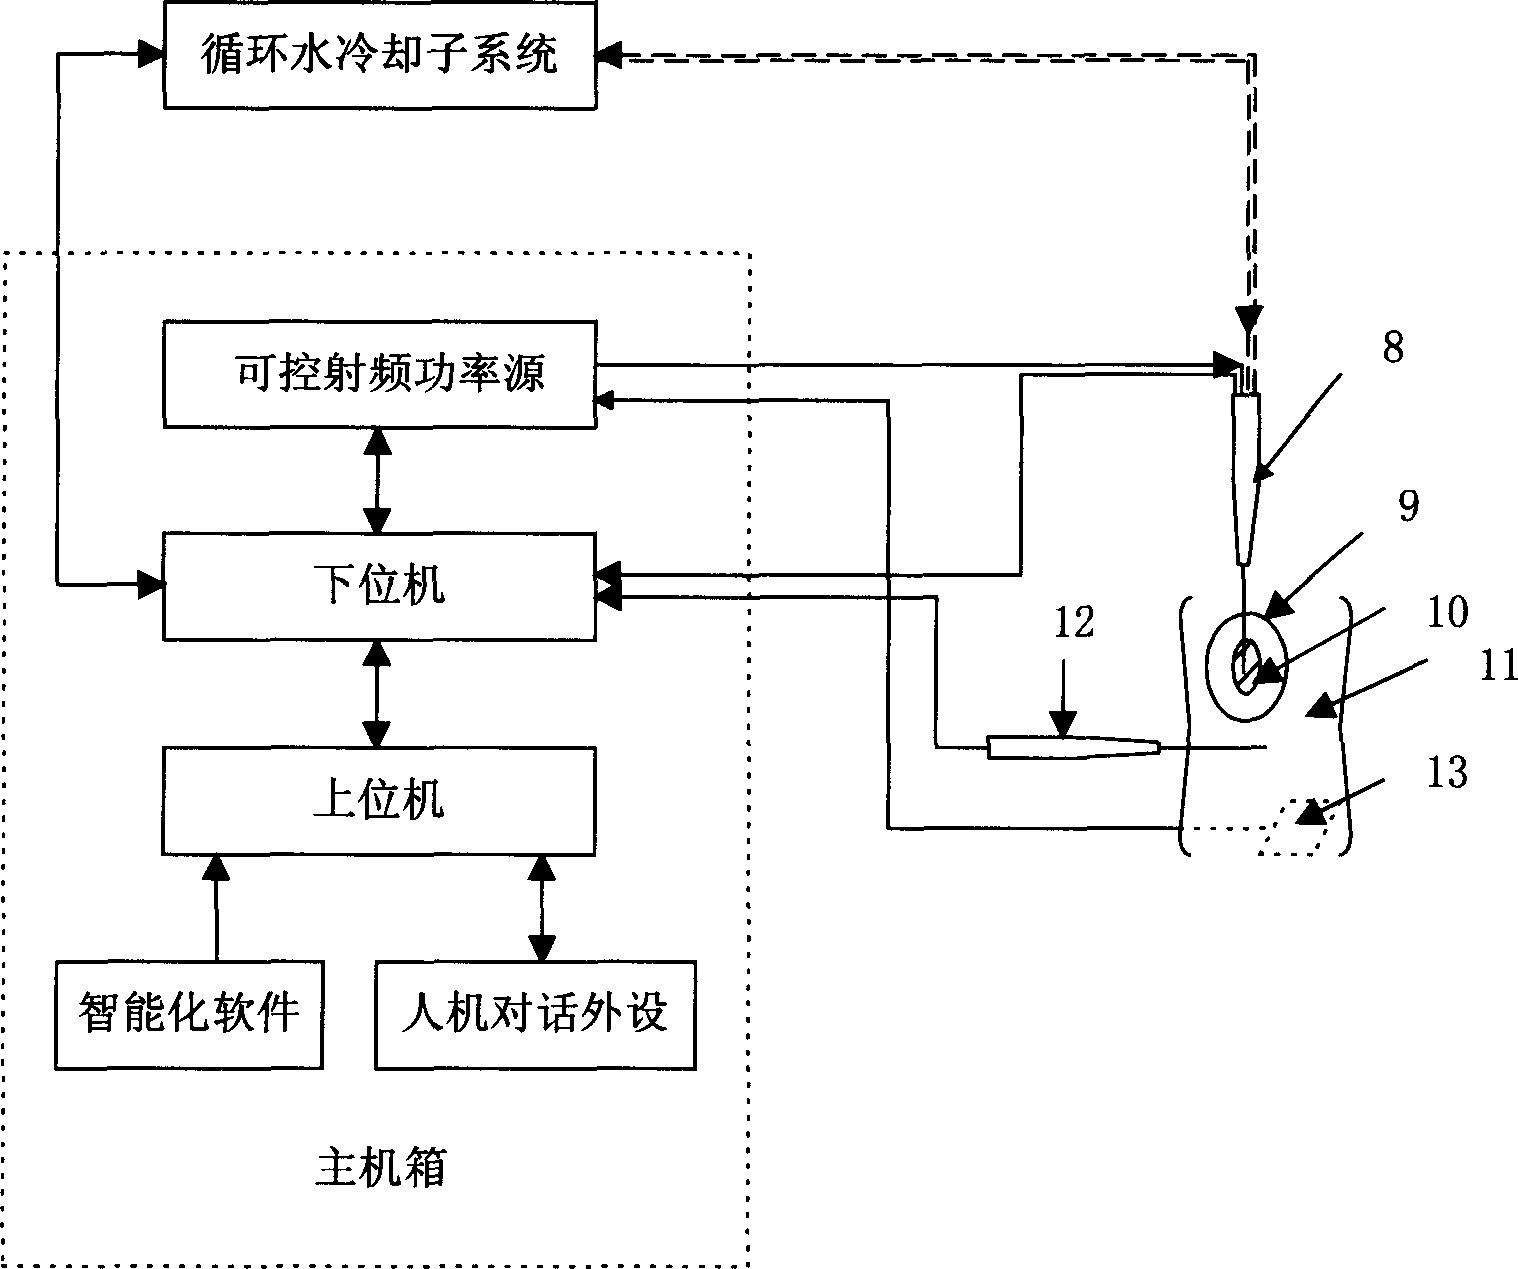 Water-cooled radio frequency system for tumour extinguishing